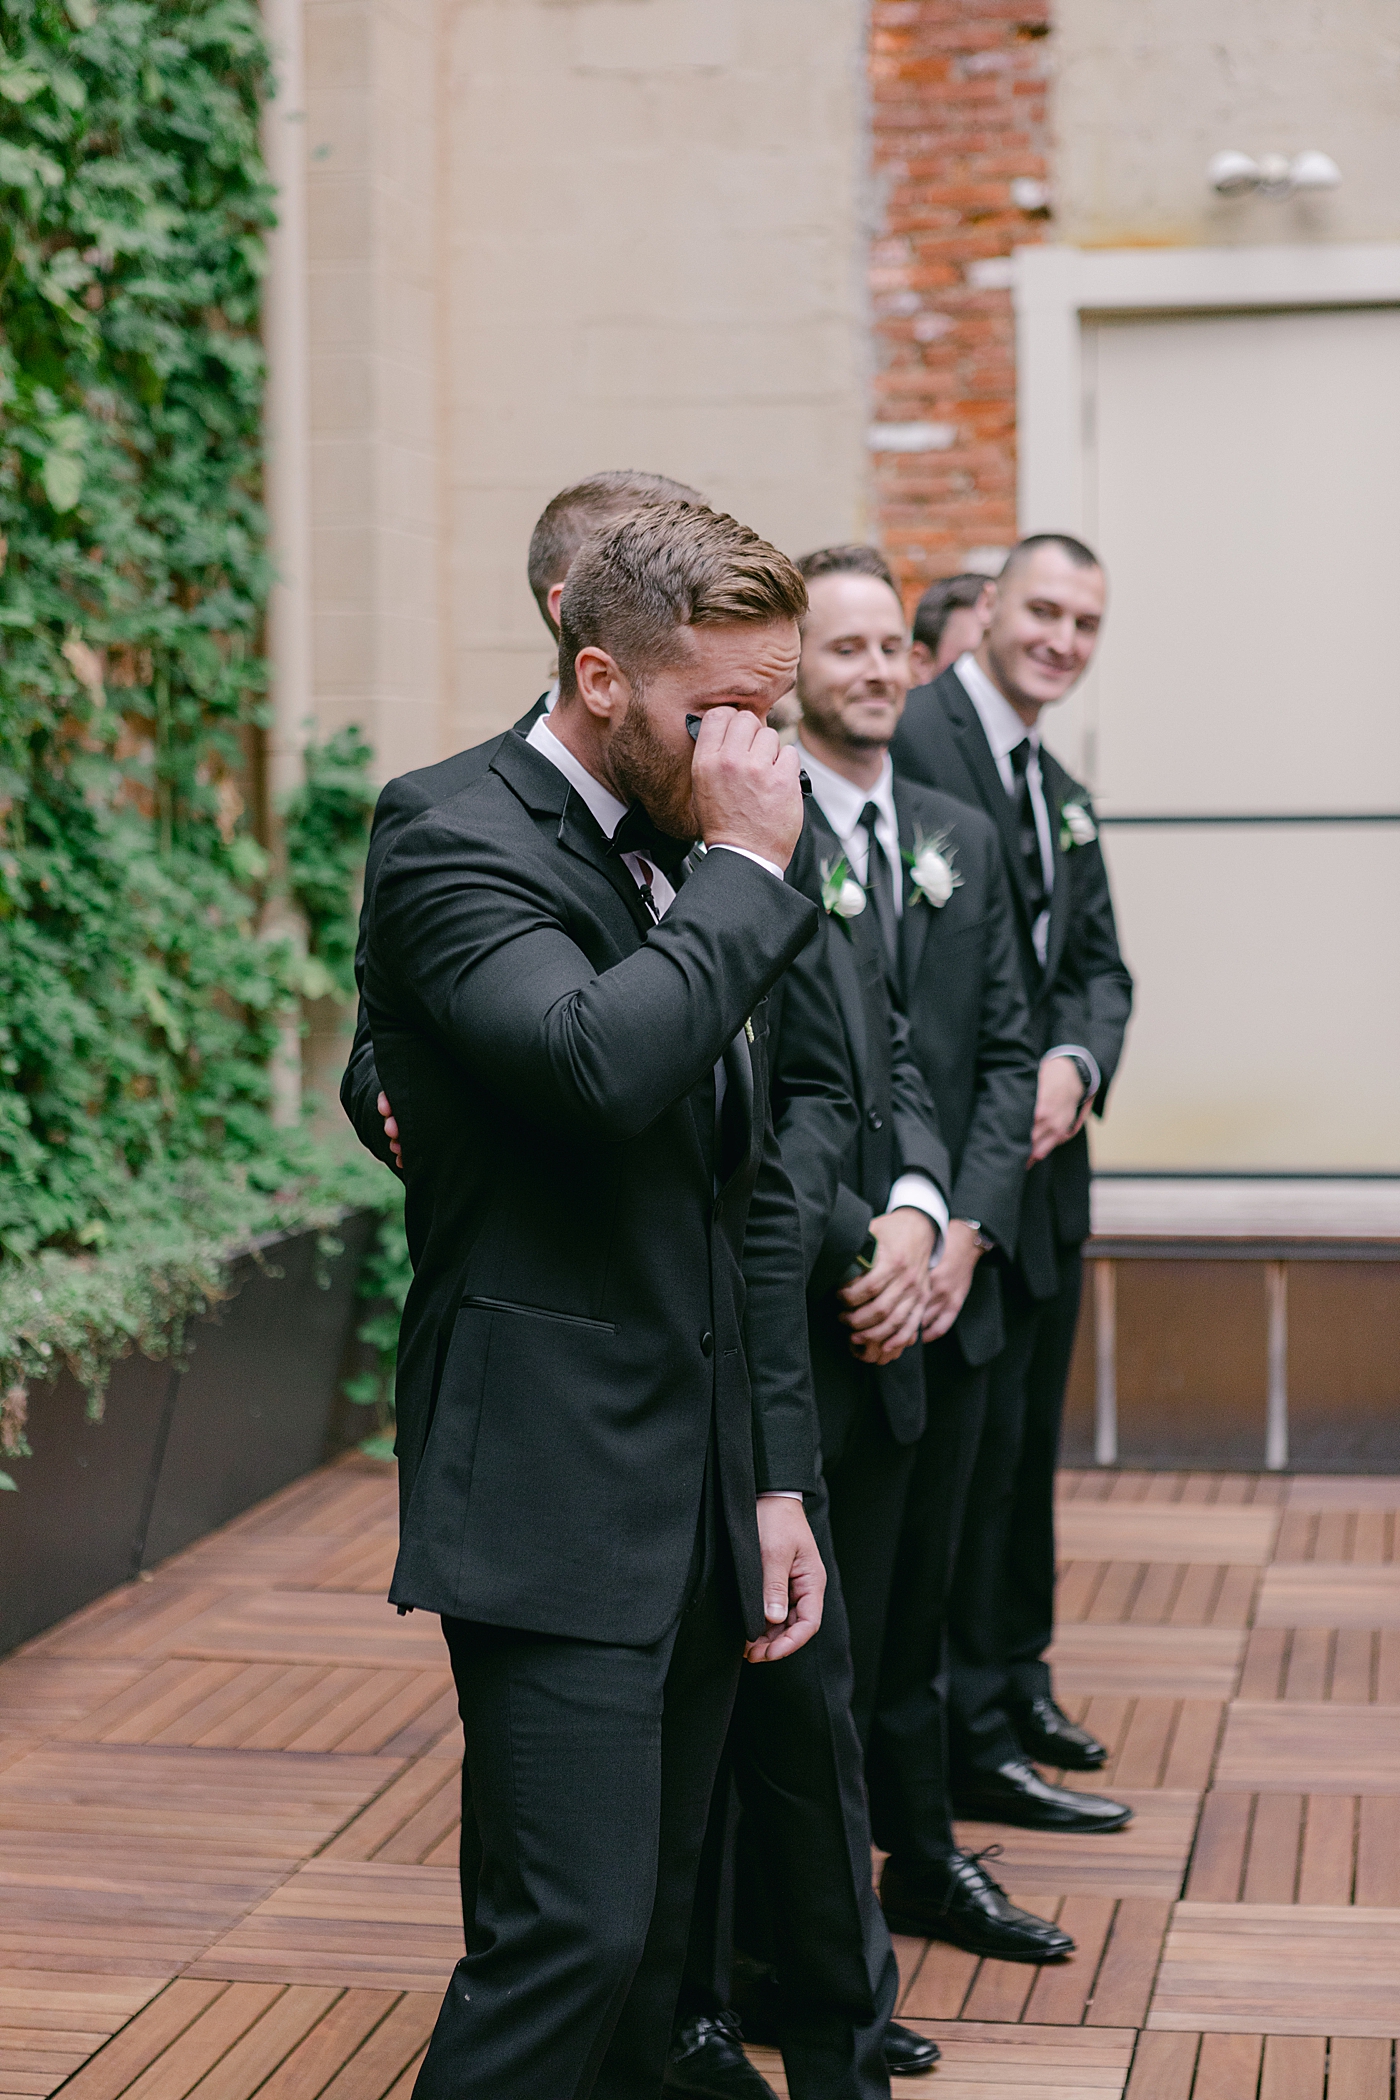 Groom wiping tears as the bride walks down the aisle | Excelsior PA Wedding Photography by Hope Helmuth Photography